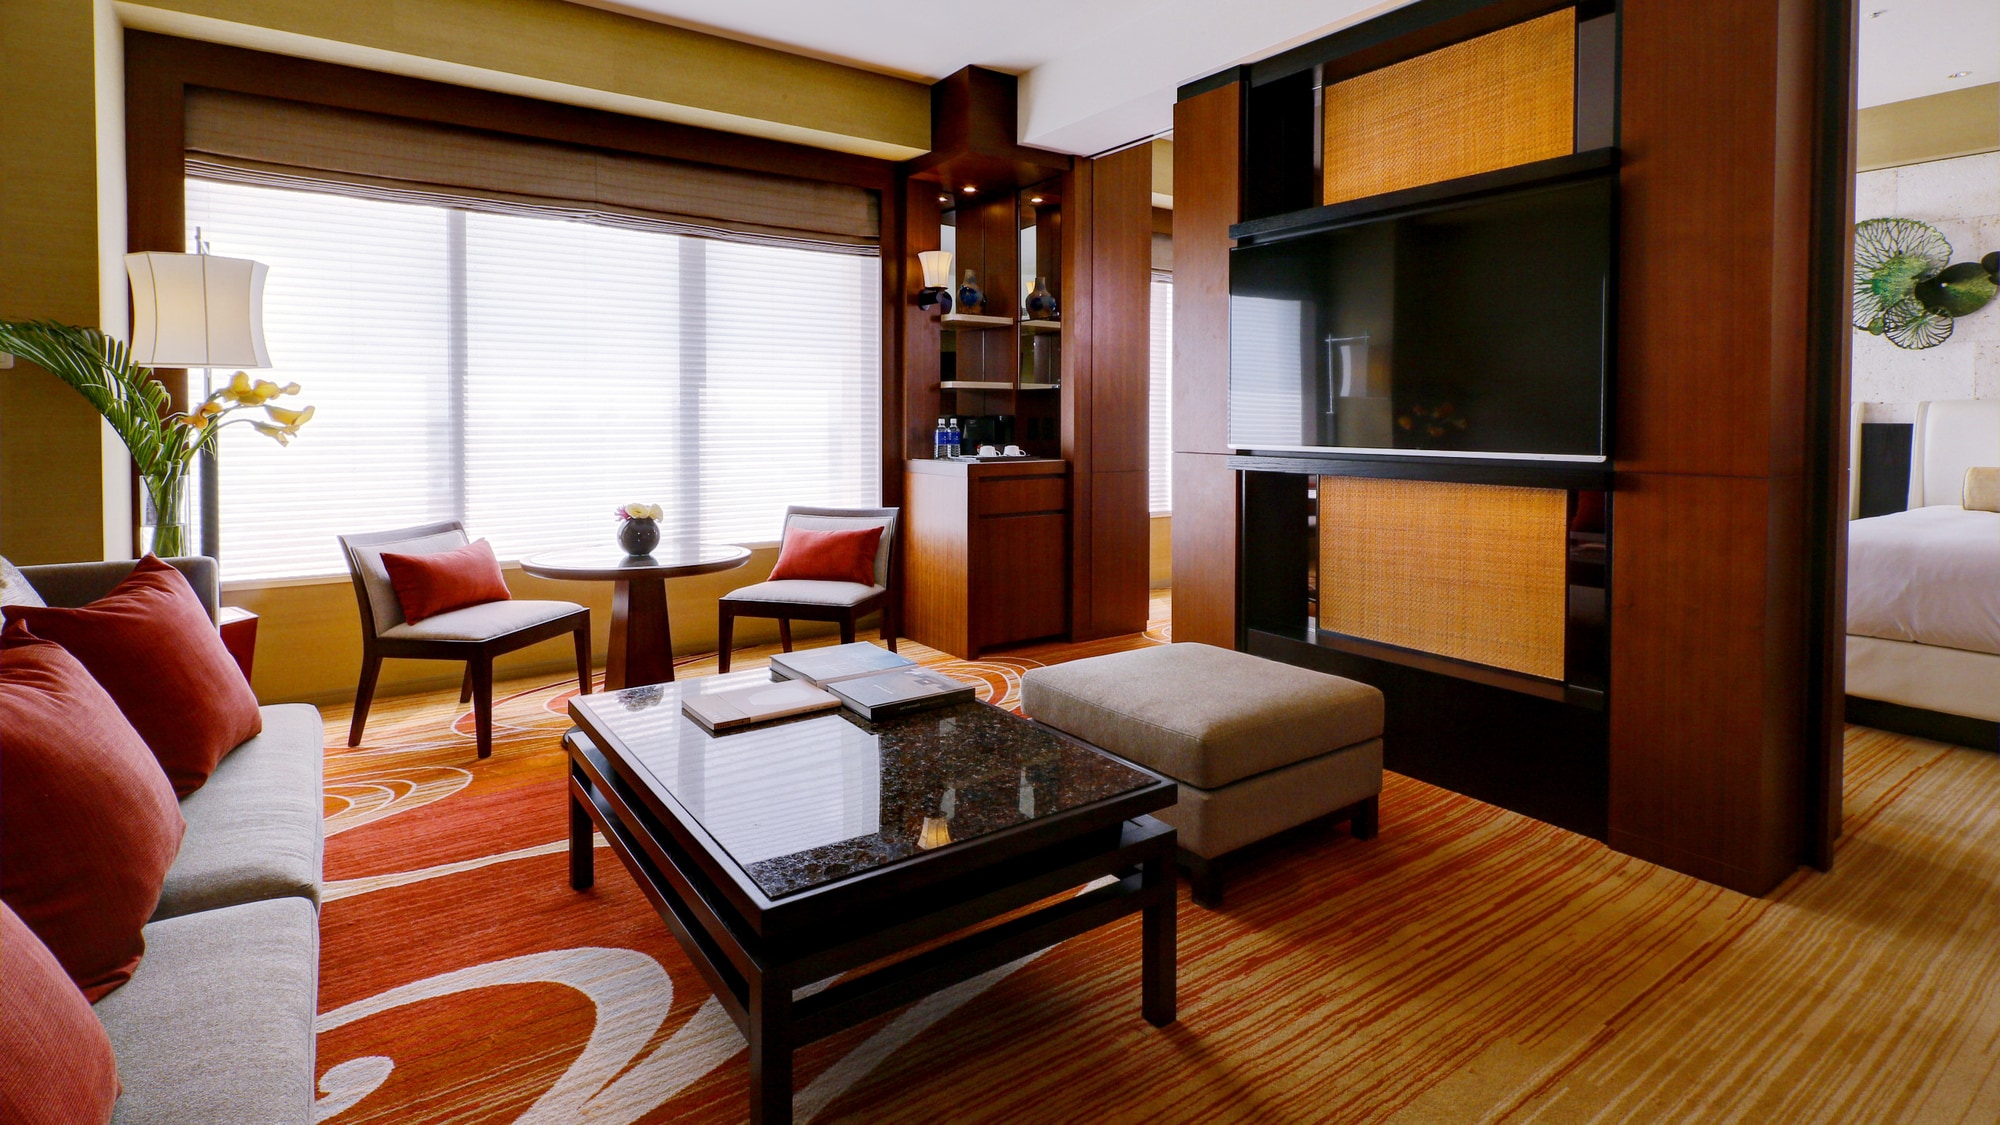 [Regency Executive Suite Twin] A room with a color scheme that feels warm like the sun in Okinawa.